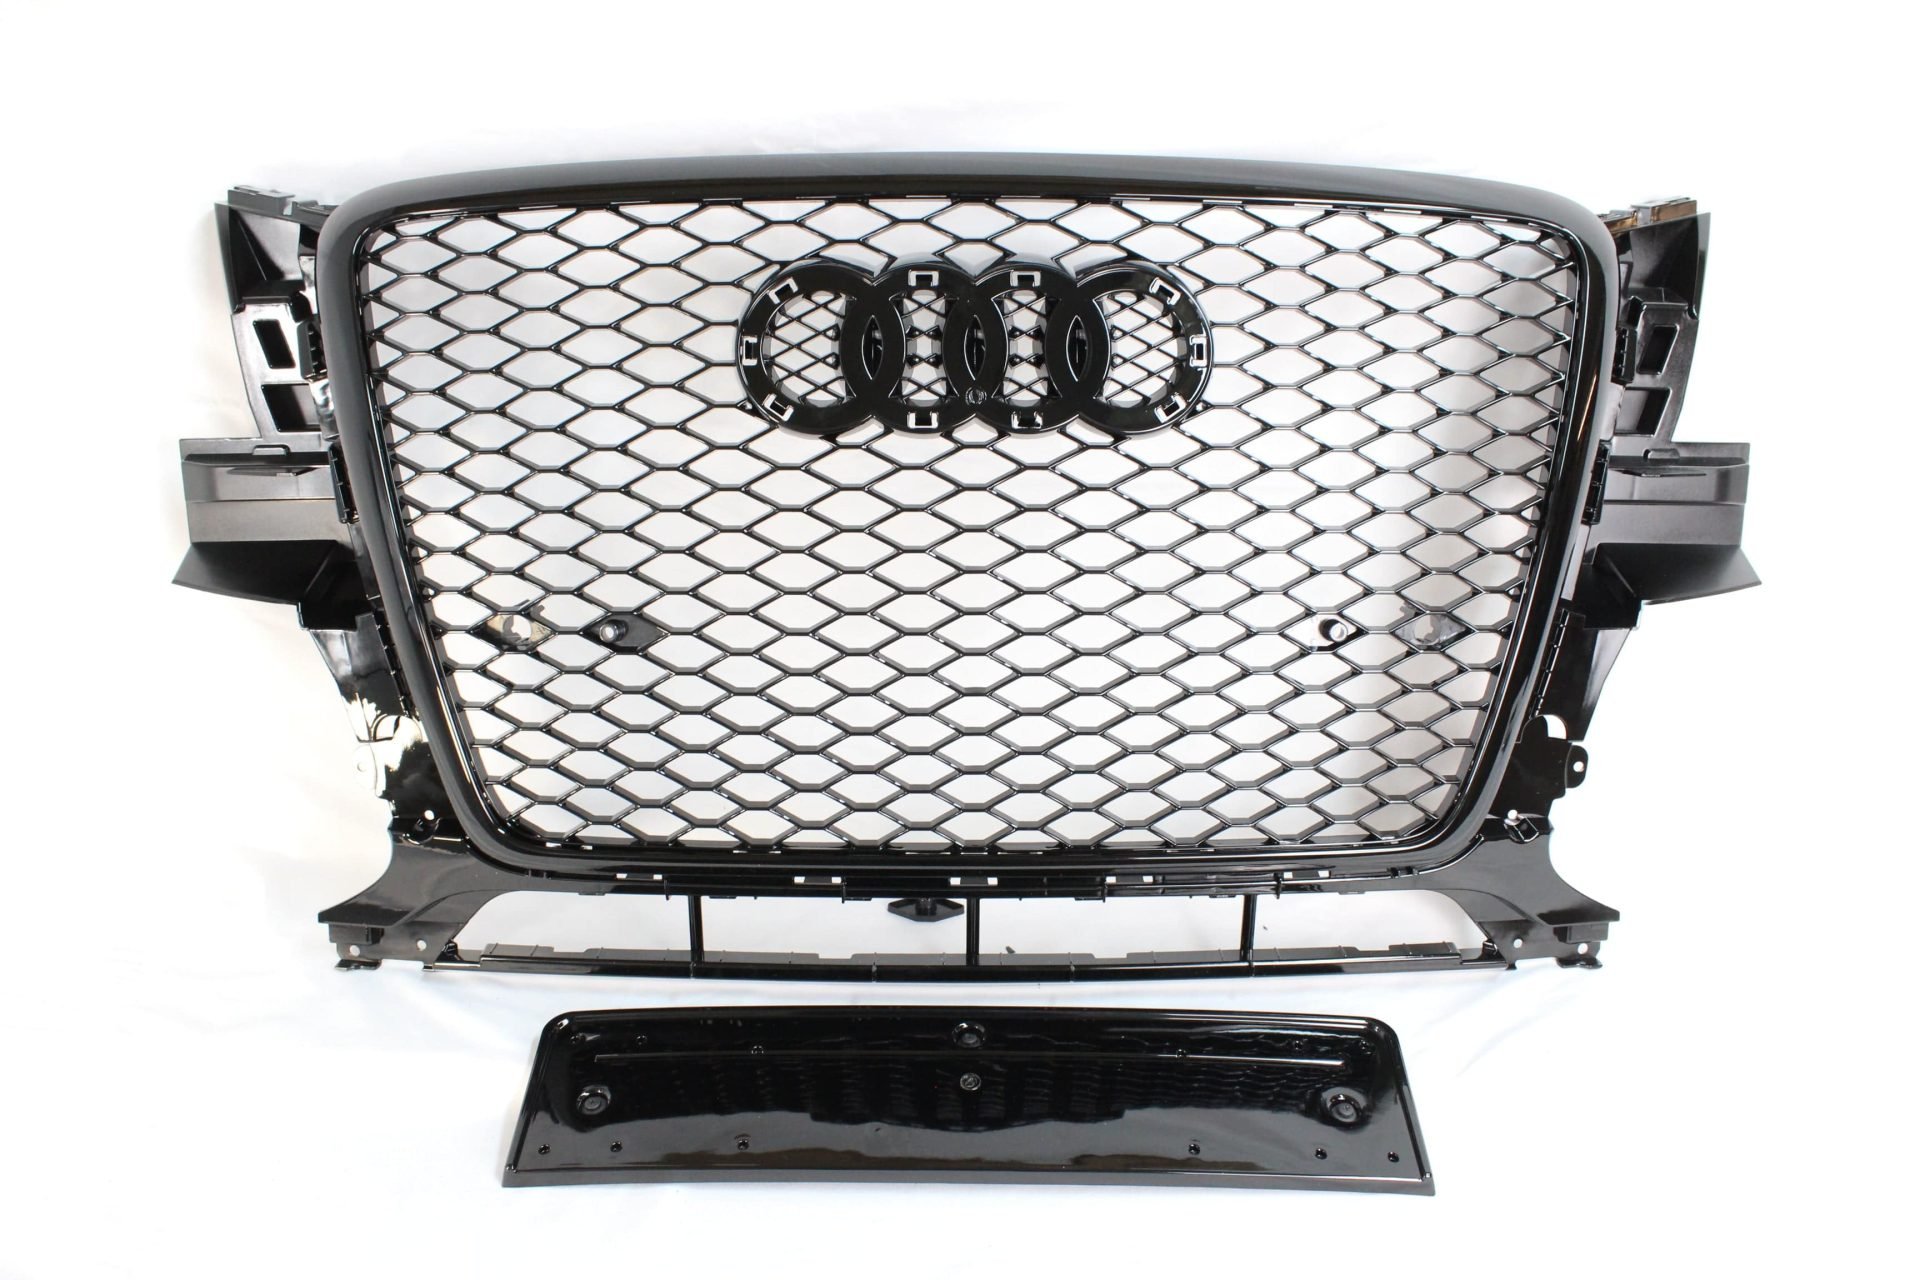 https://www.modcentraluk.com/wp-content/uploads/2023/07/blak-by-ct-grille-audi-q5-sq5-2008-2012-all-black-honeycomb-grille-blak-by-ct-carbon-ct-carbon-audi-q5-sq5-2008-2012-all-black-honeycomb-grill-23067723595946-scaled.jpg